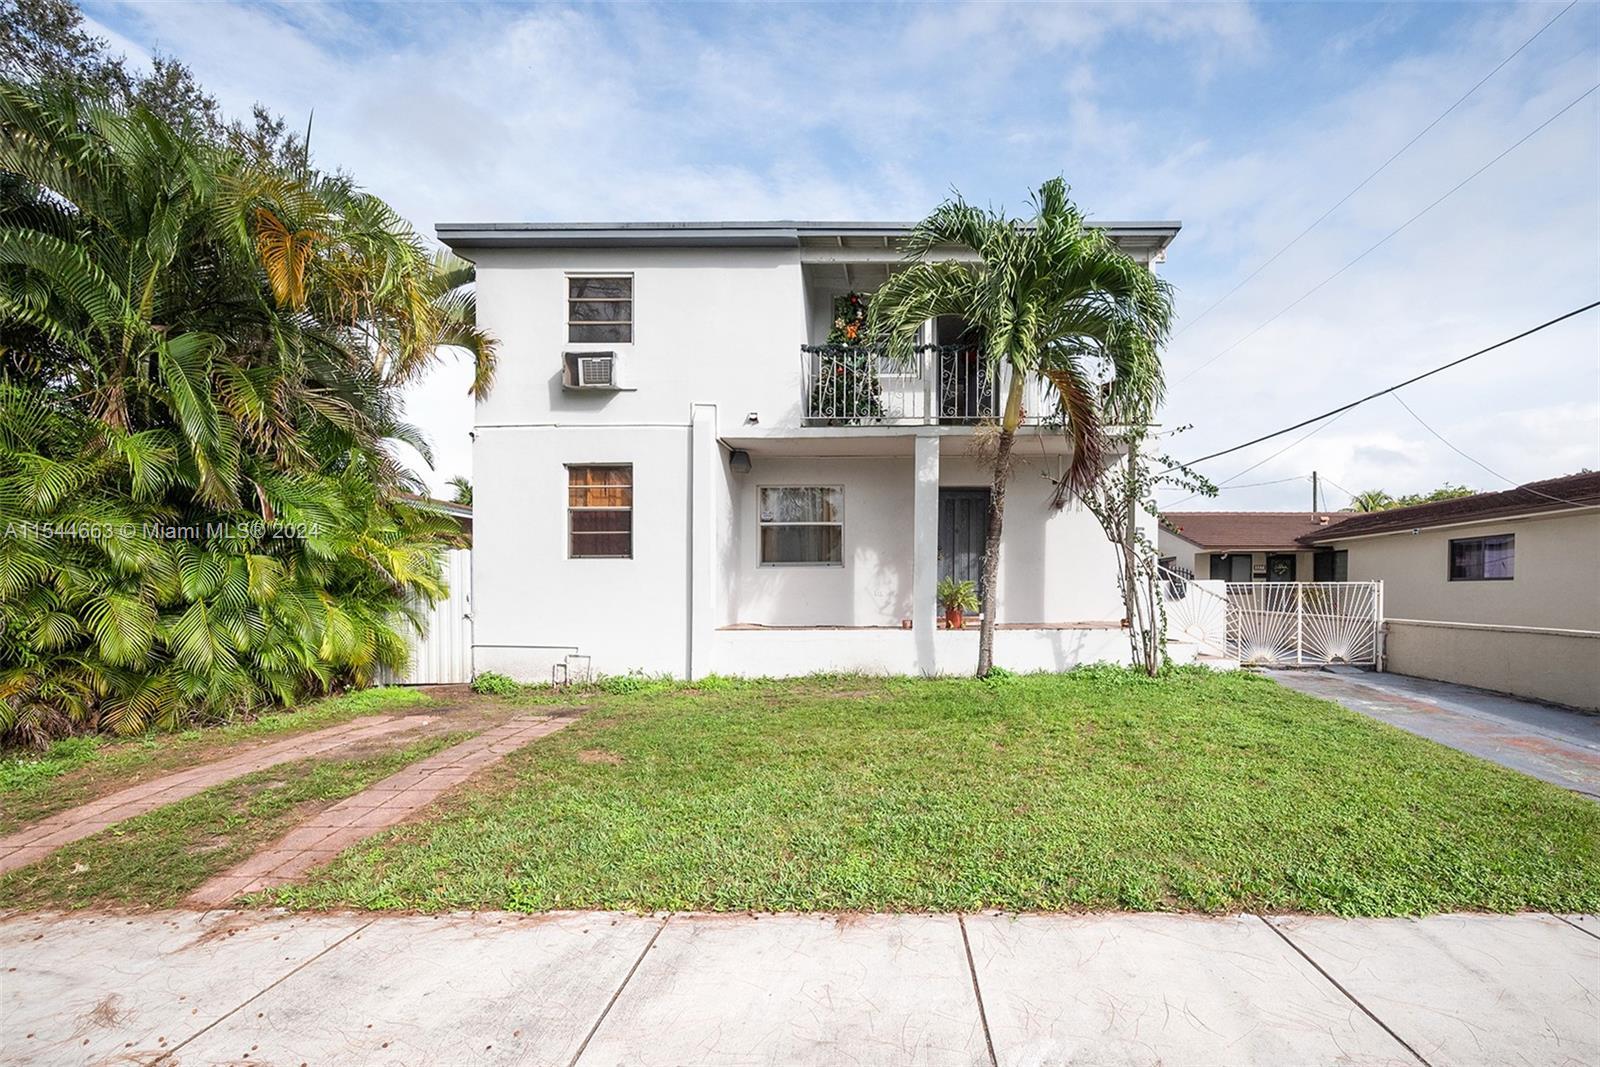 Photo of 531 NW 35th Ave in Miami, FL